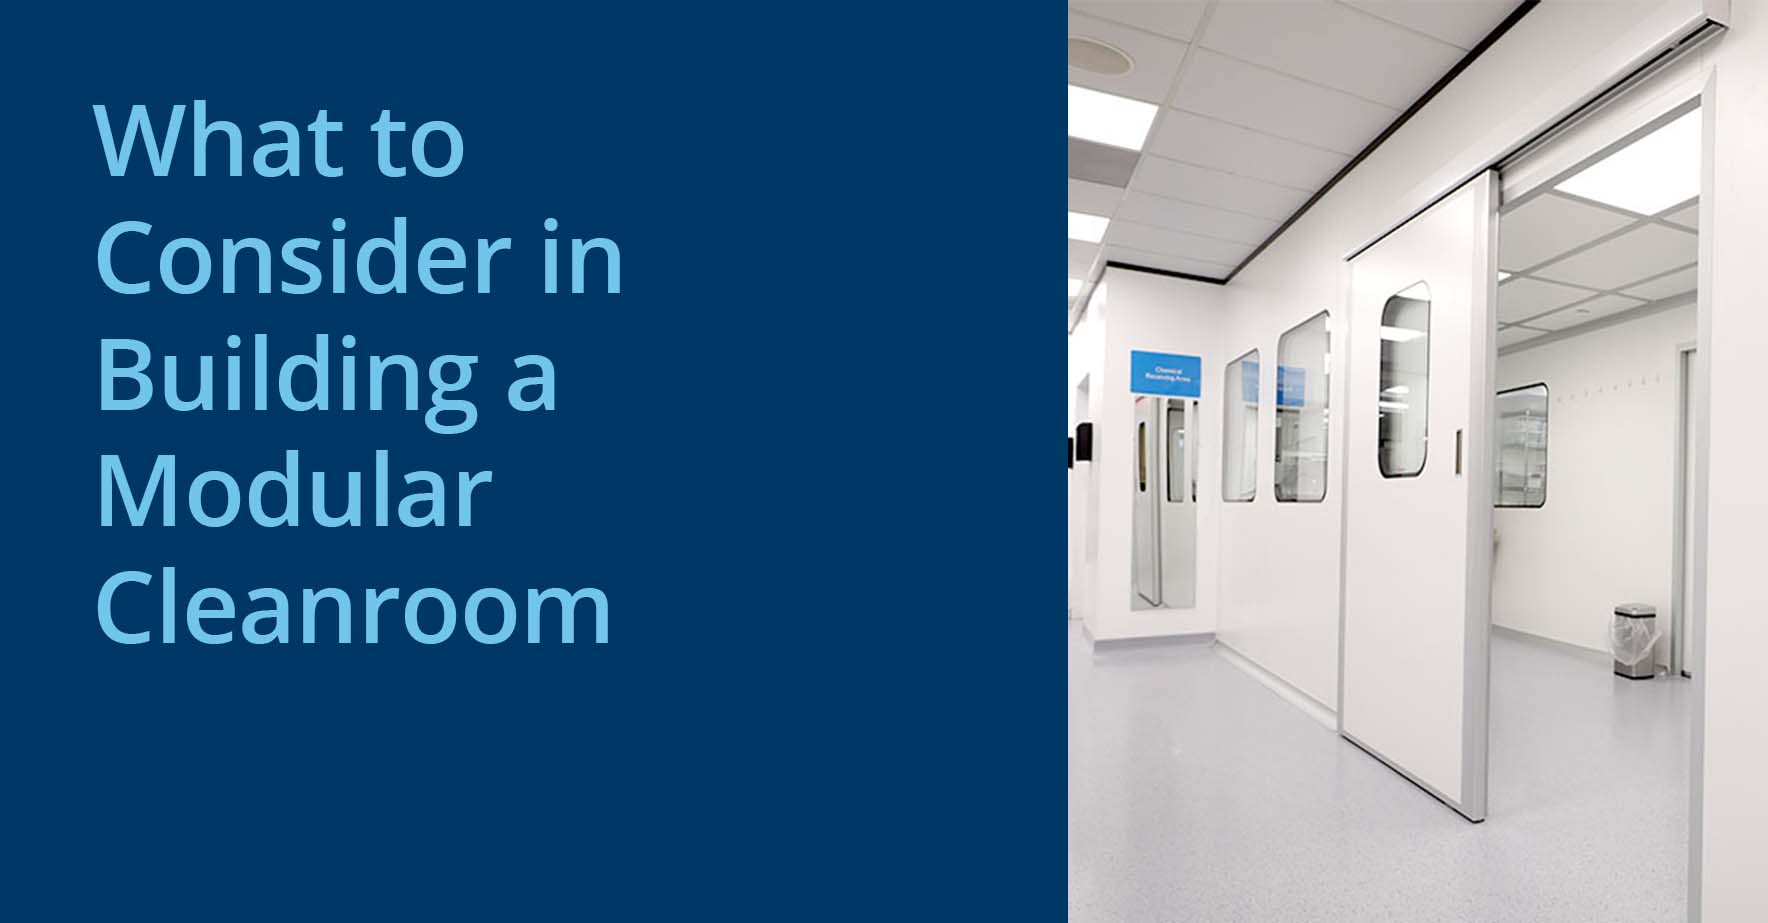 What_to_Consider_in_Building_a_Modular_Cleanroom.jpg